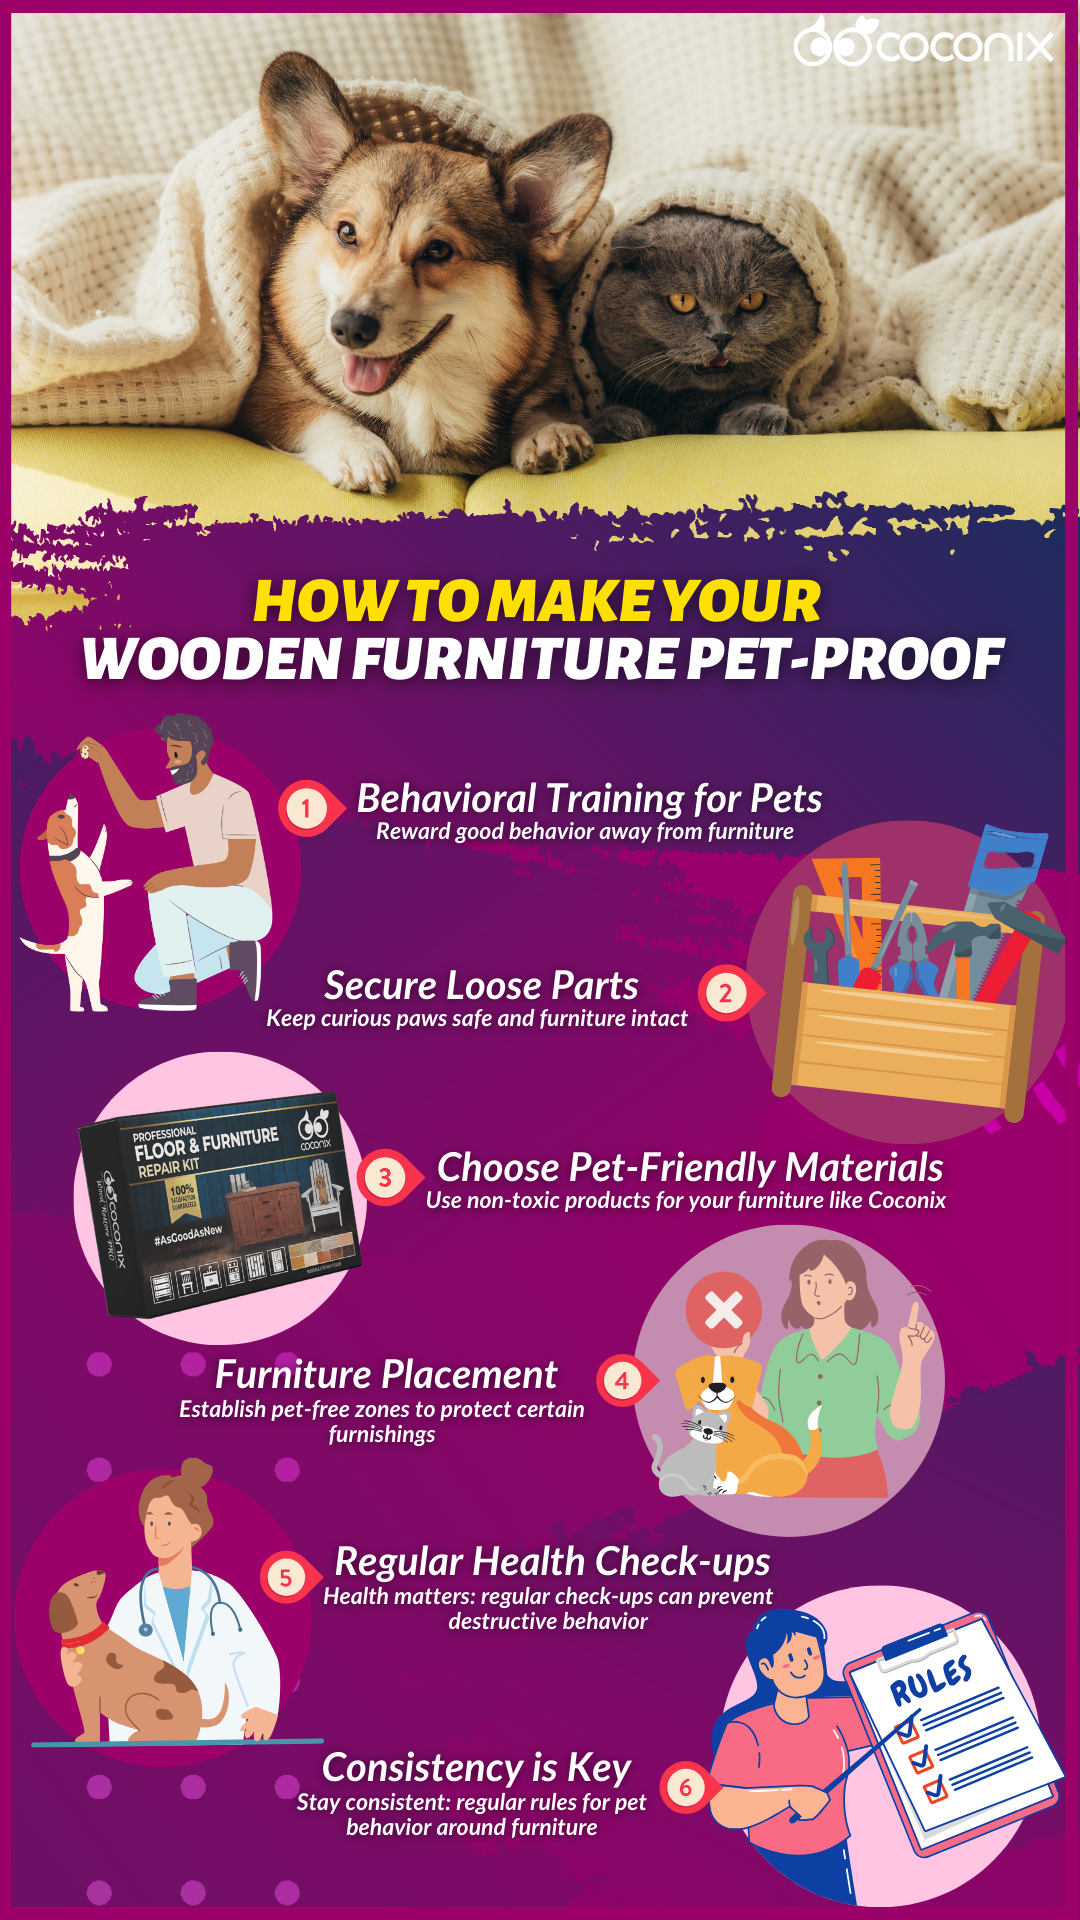 BONUS_How_to_Make_Your_Wooden_Furniture_Pet-Proof